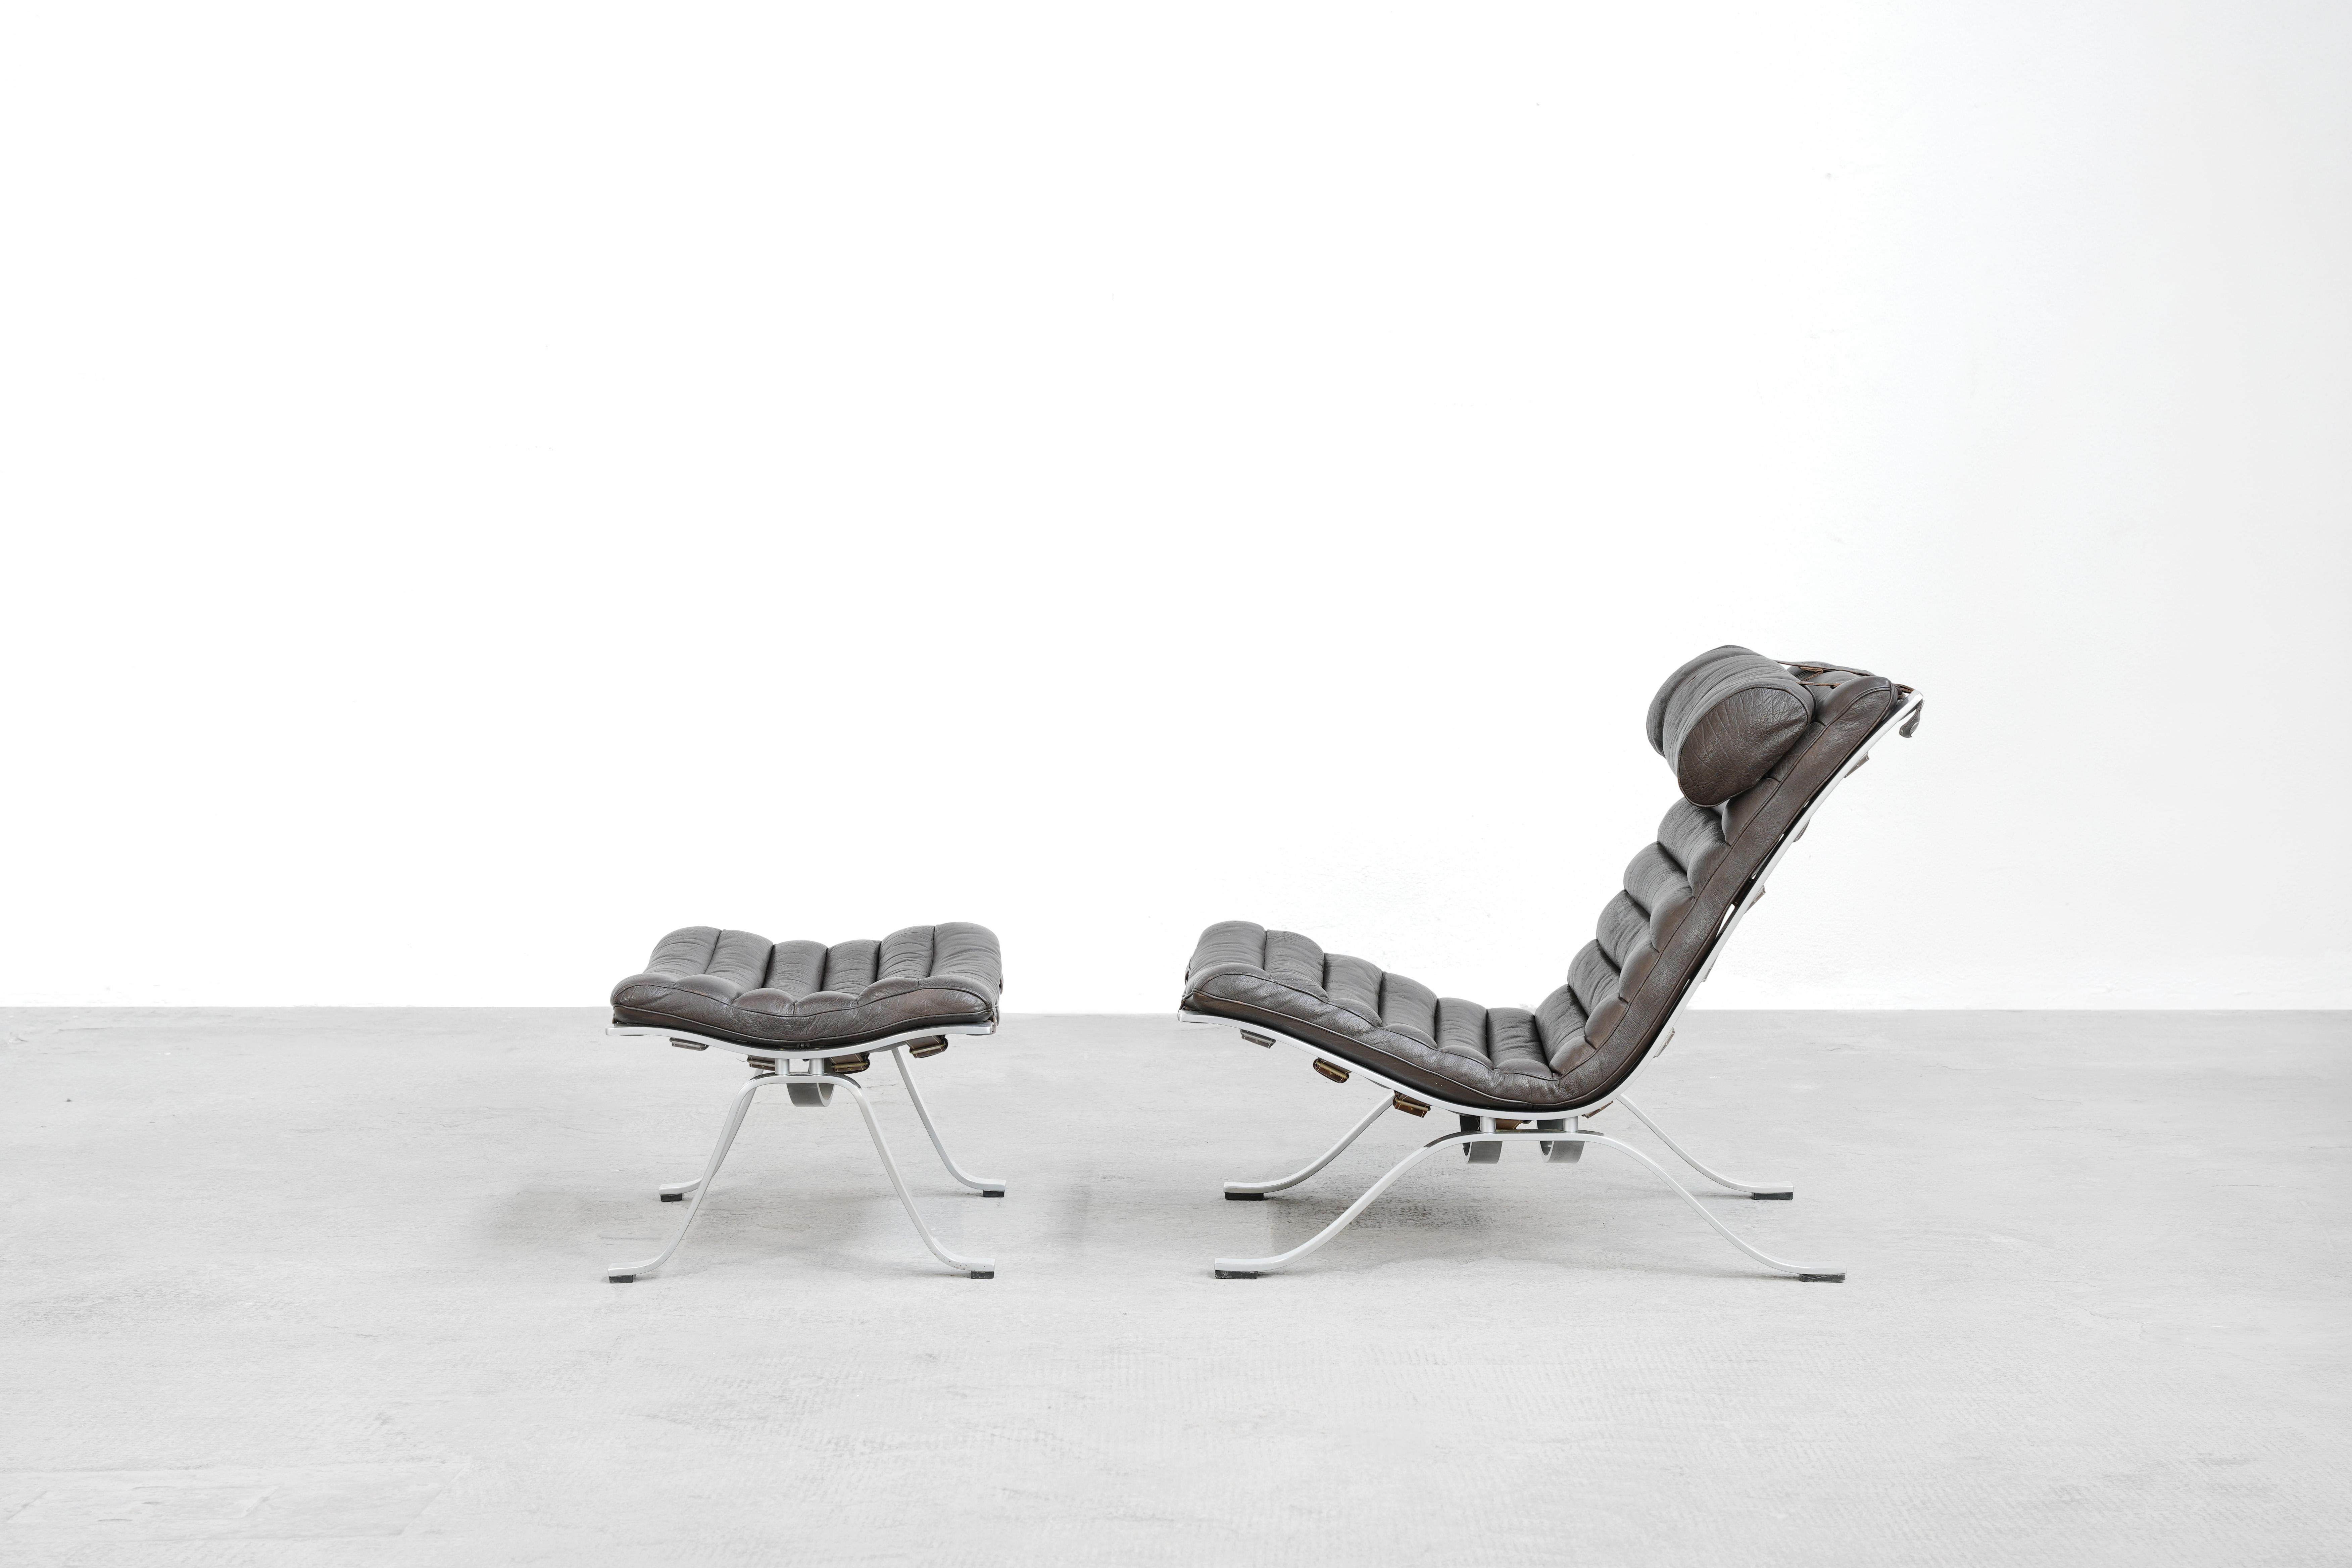 Beautiful lounge chair and ottoman designed by Arne Norell and manufactured by Norell Møbel AB in Sweden in 1966.
The lounge chair and the matching ottoman are in wonderful original condition, come with dark brown leather and without any damages or